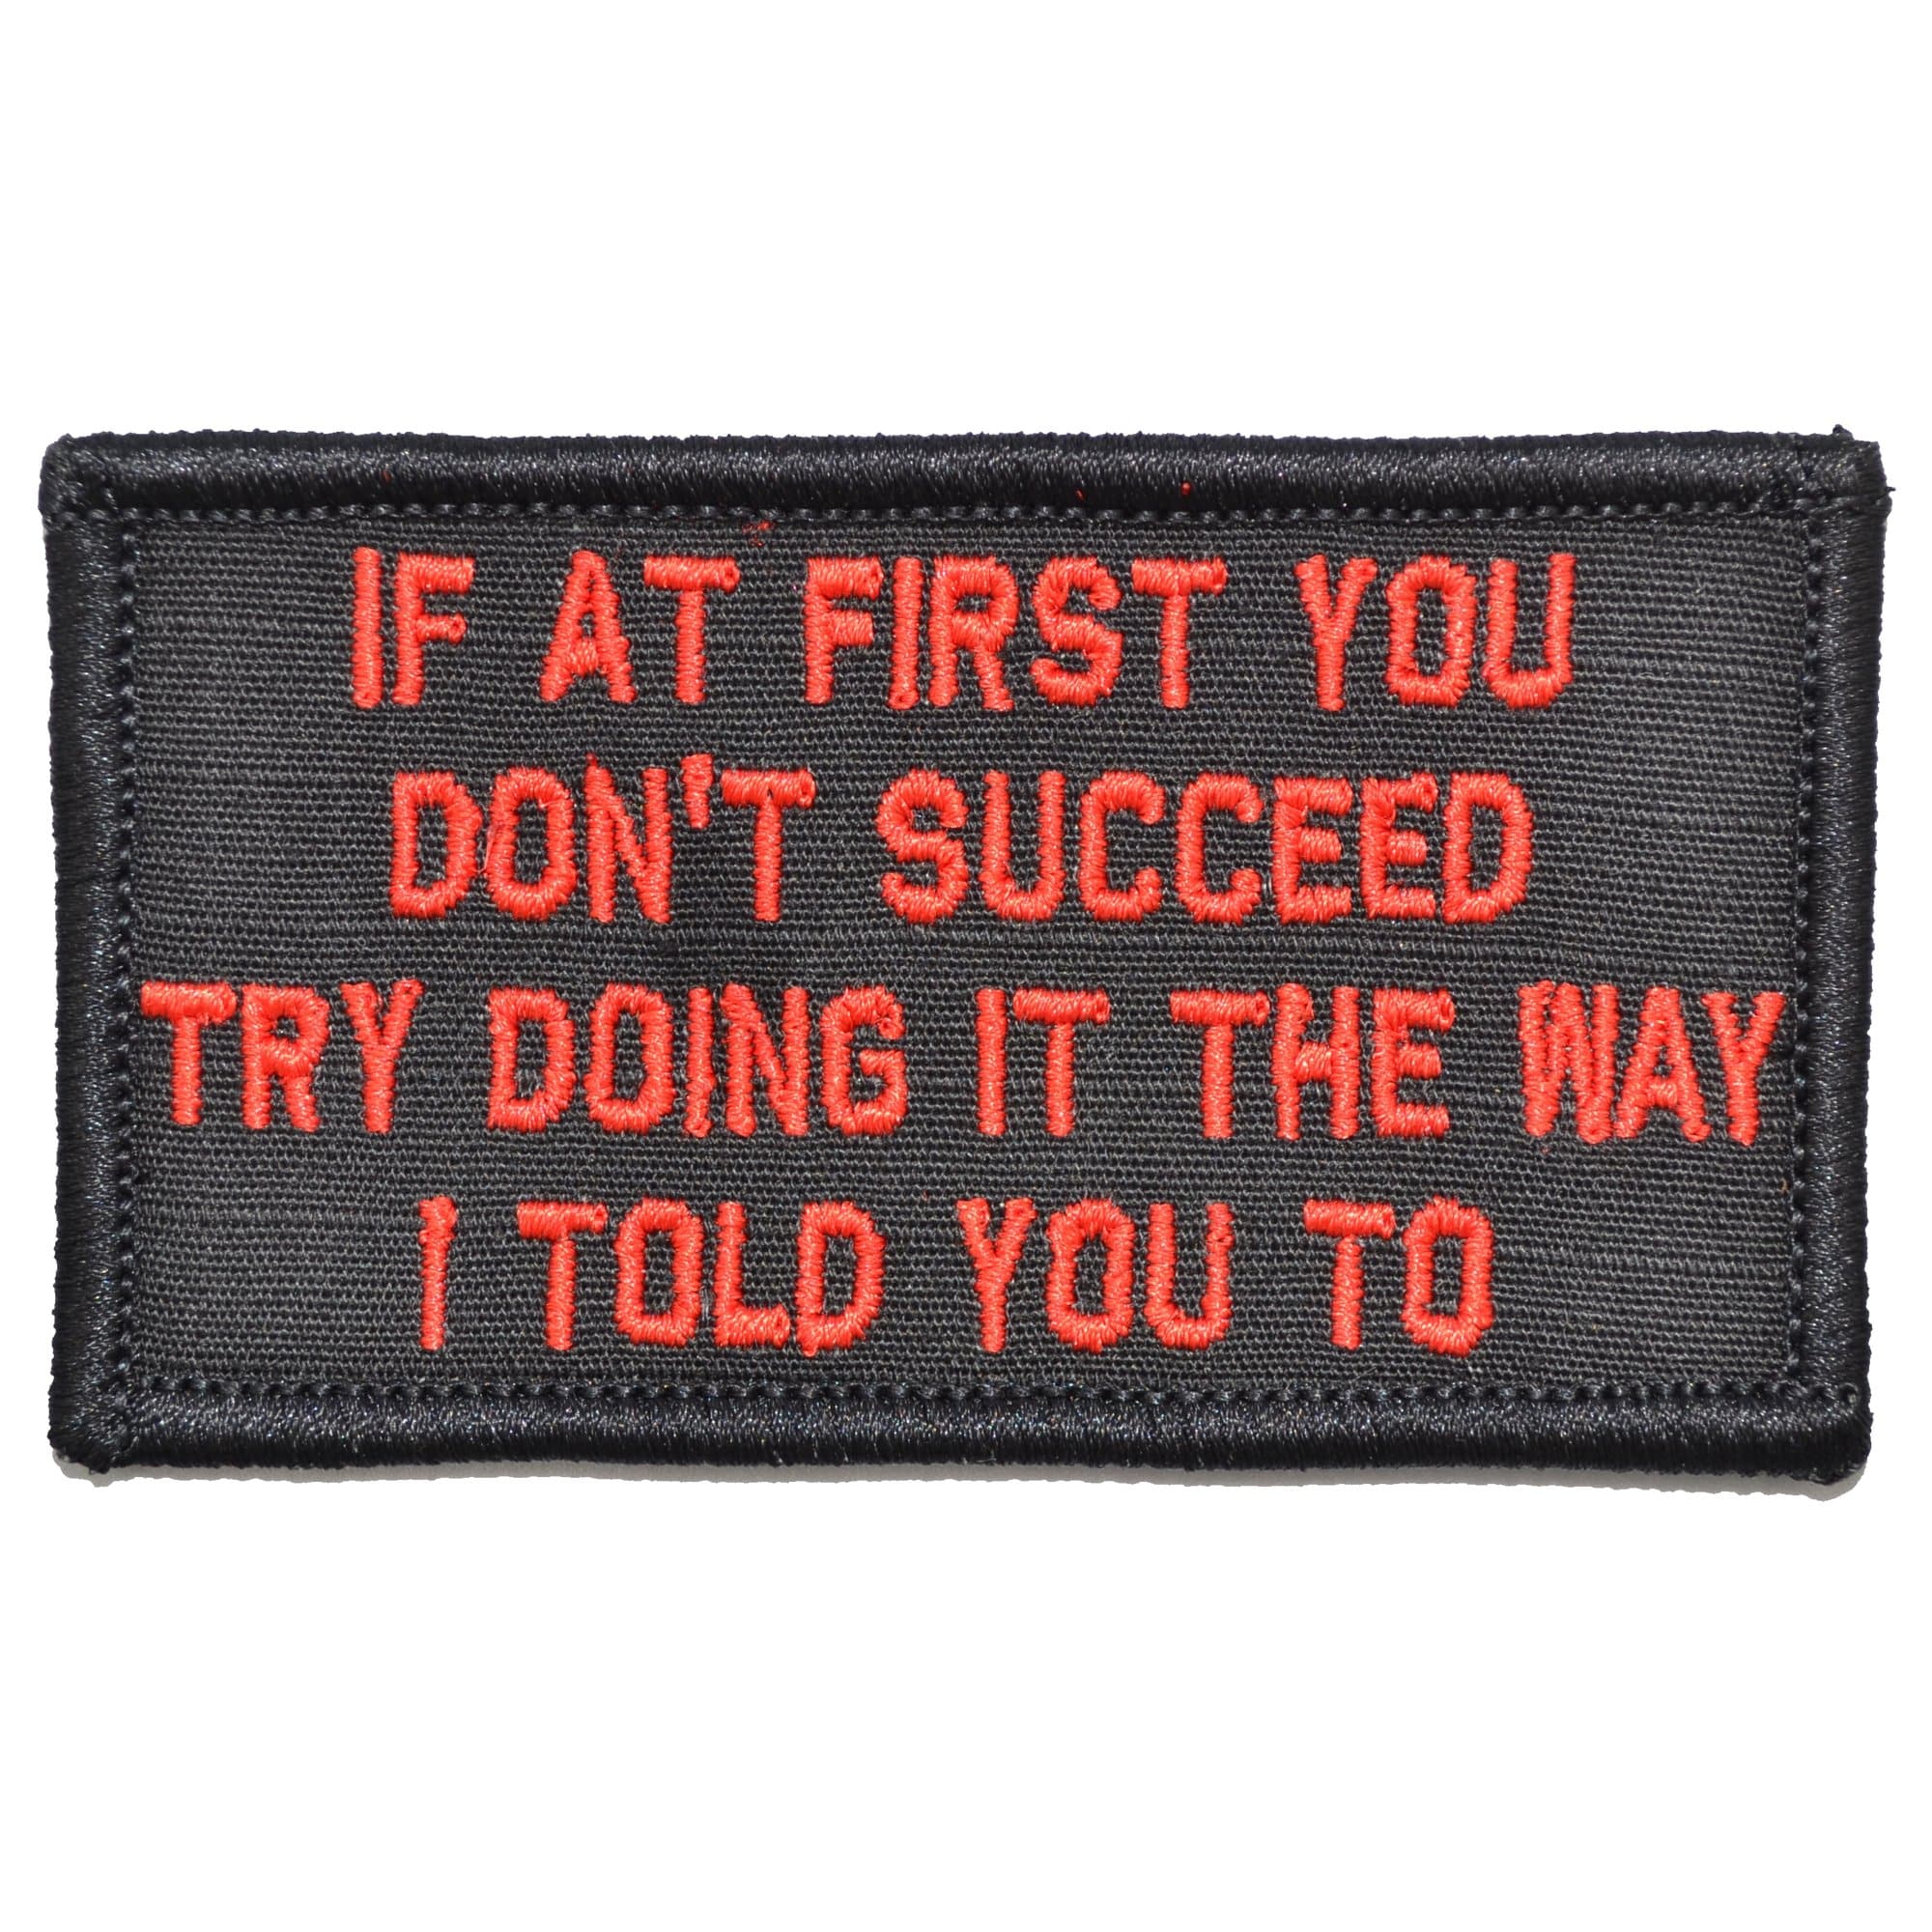 Tactical Gear Junkie Patches Black w/ Red If At First You Don't Succeed, Try Doing It The Way I Told You To - 2x3.5 Patch